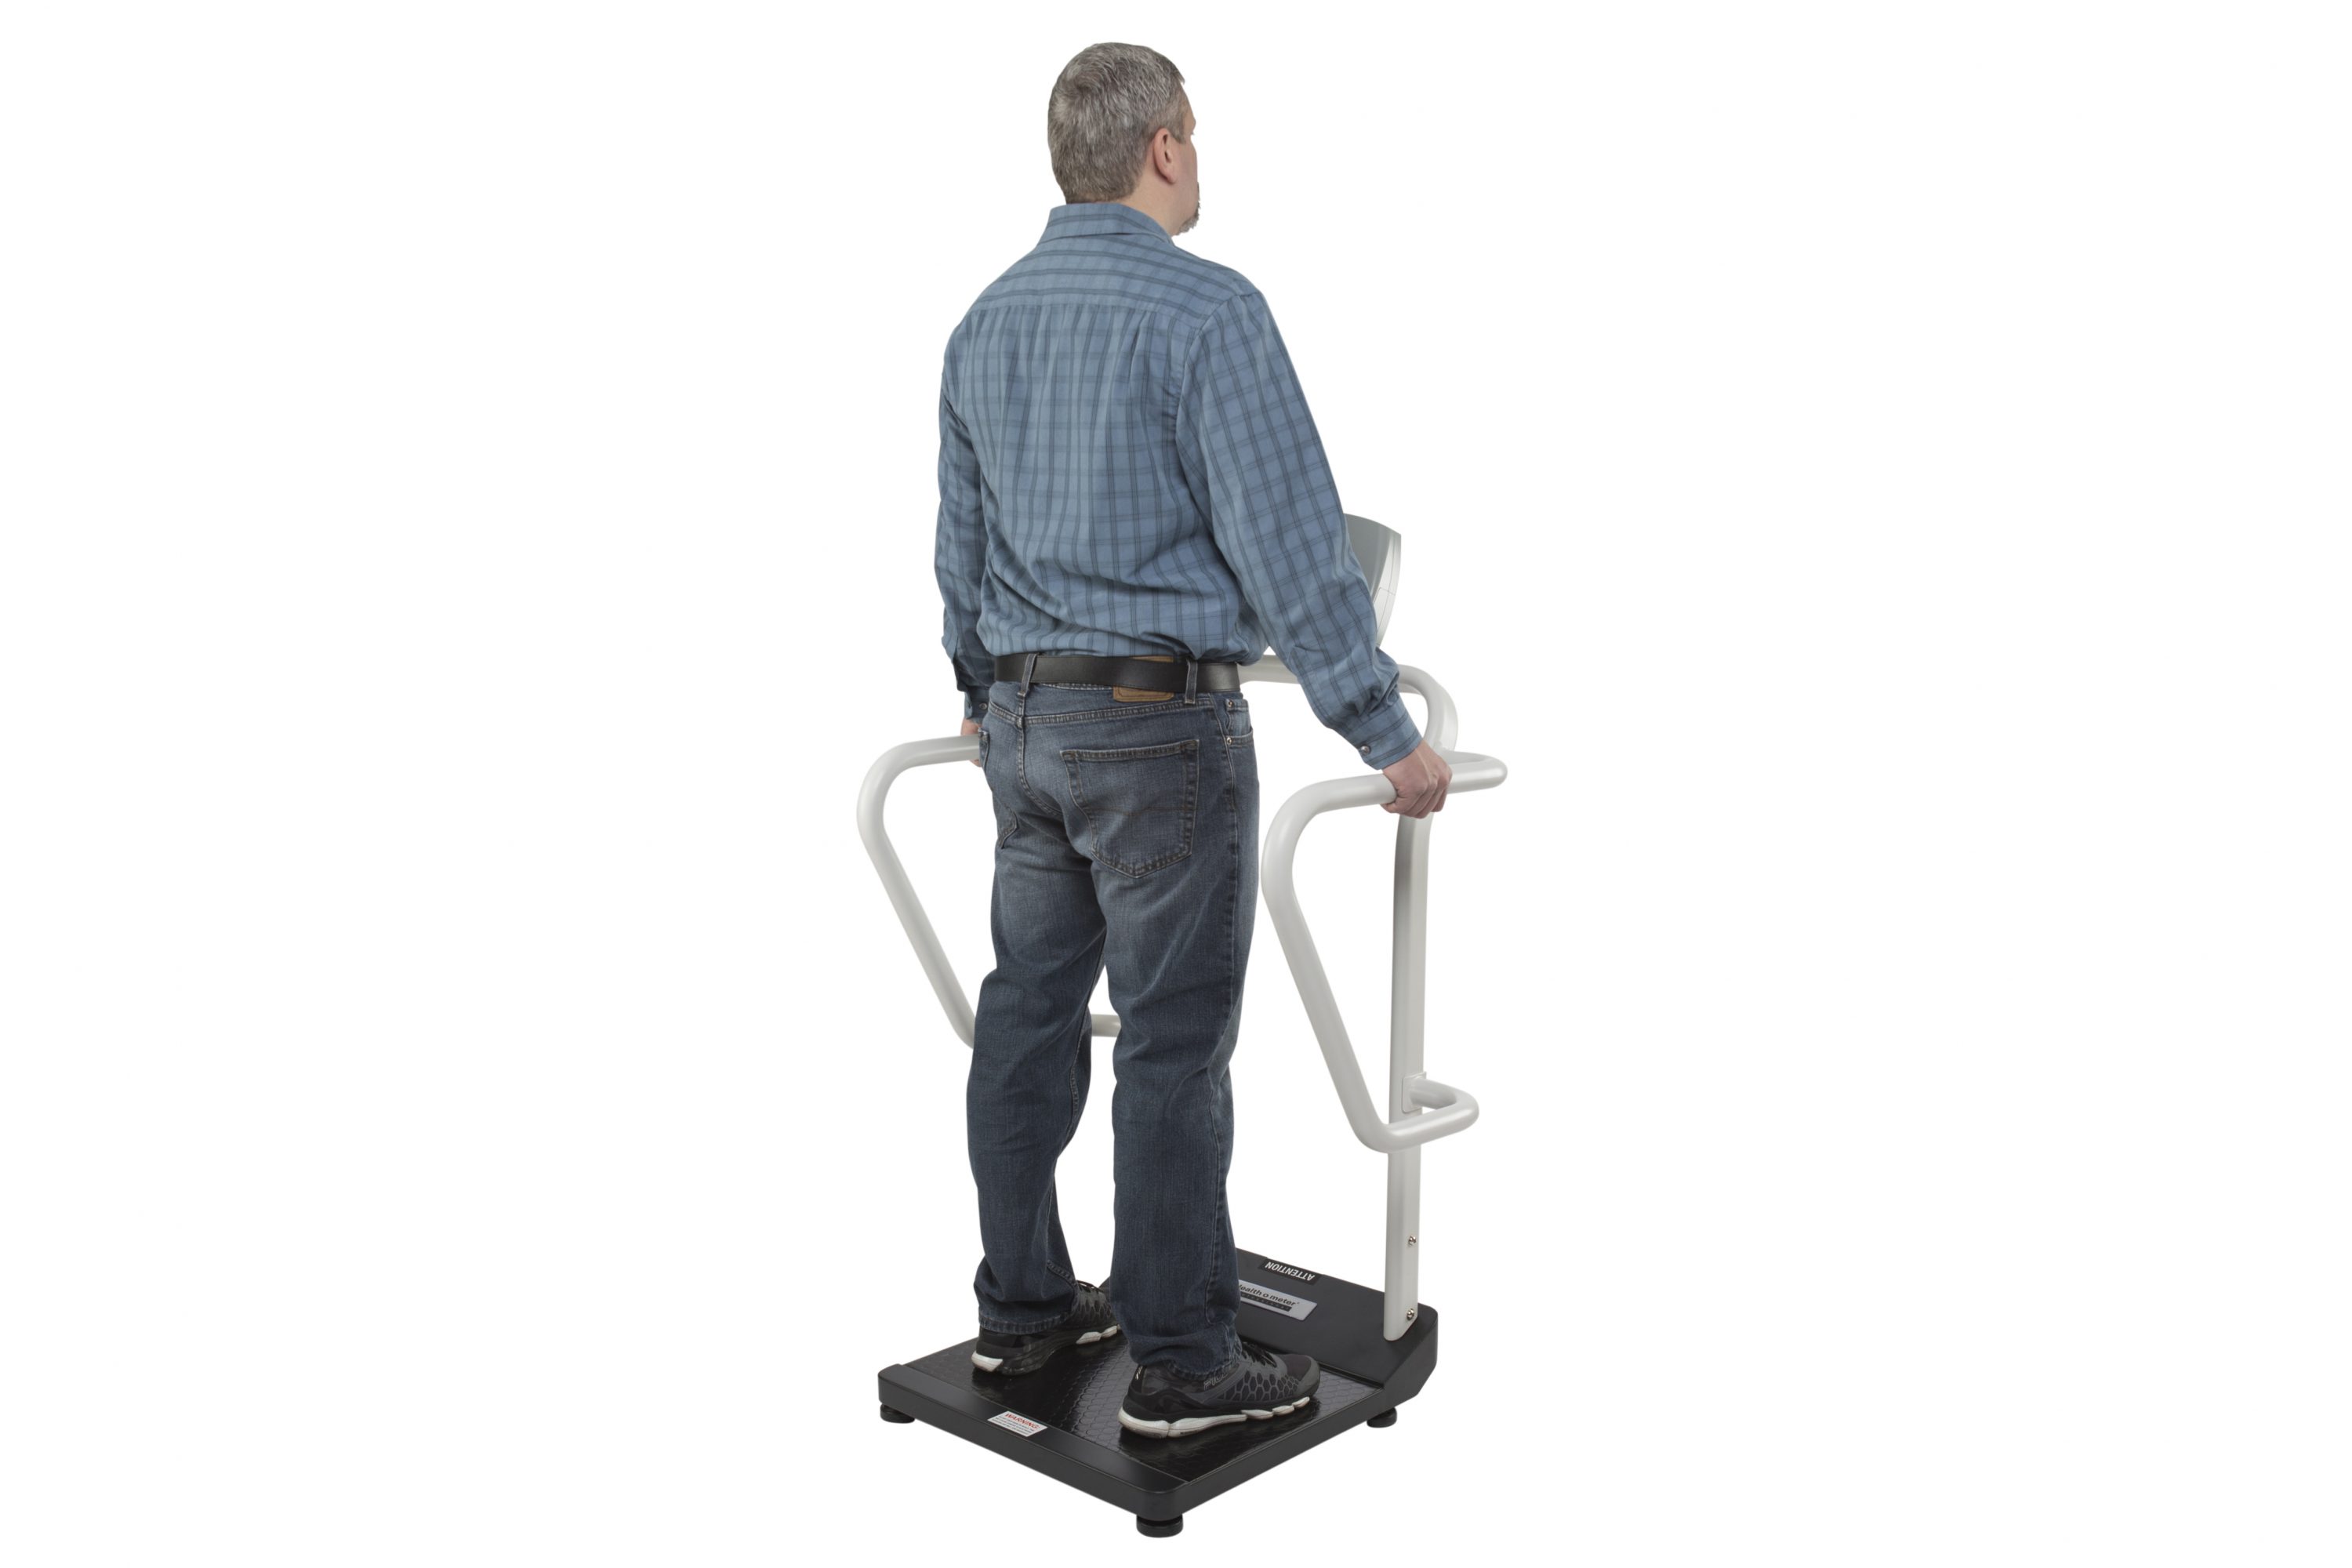 Digital Platform Scale with Extra Wide Handrails